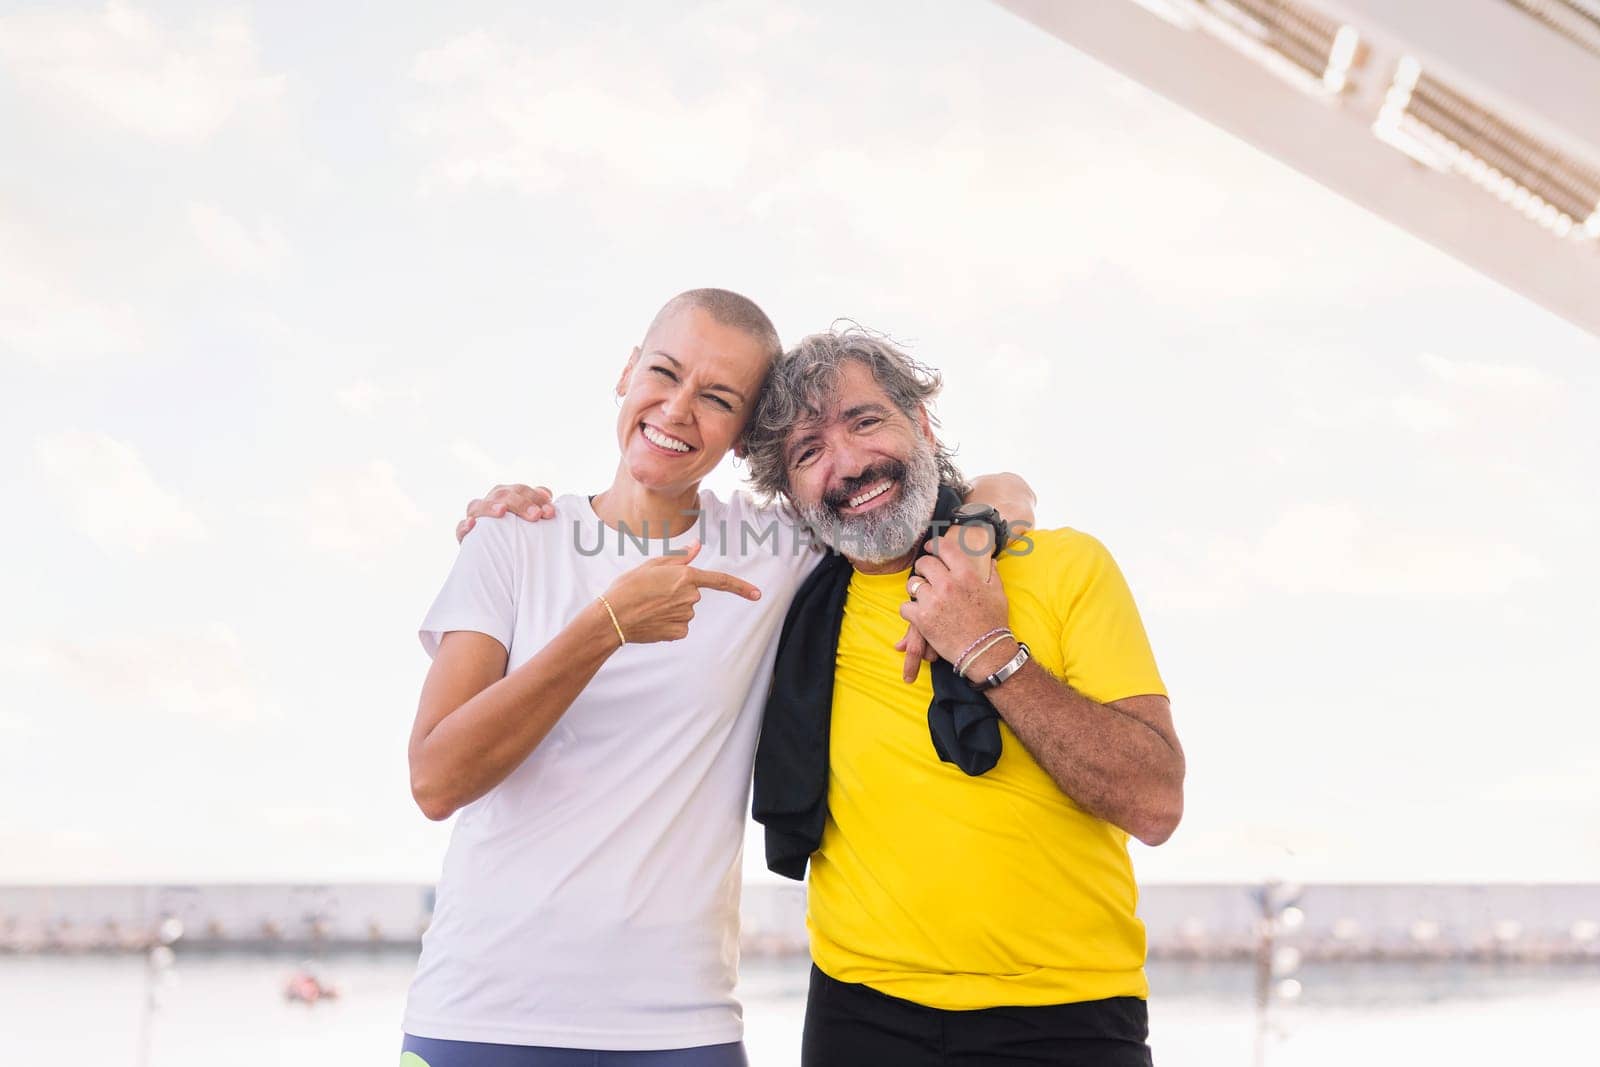 portrait of a sports senior man with young woman laughing happy looking at camera, concept of active and healthy lifestyle, copy space for text